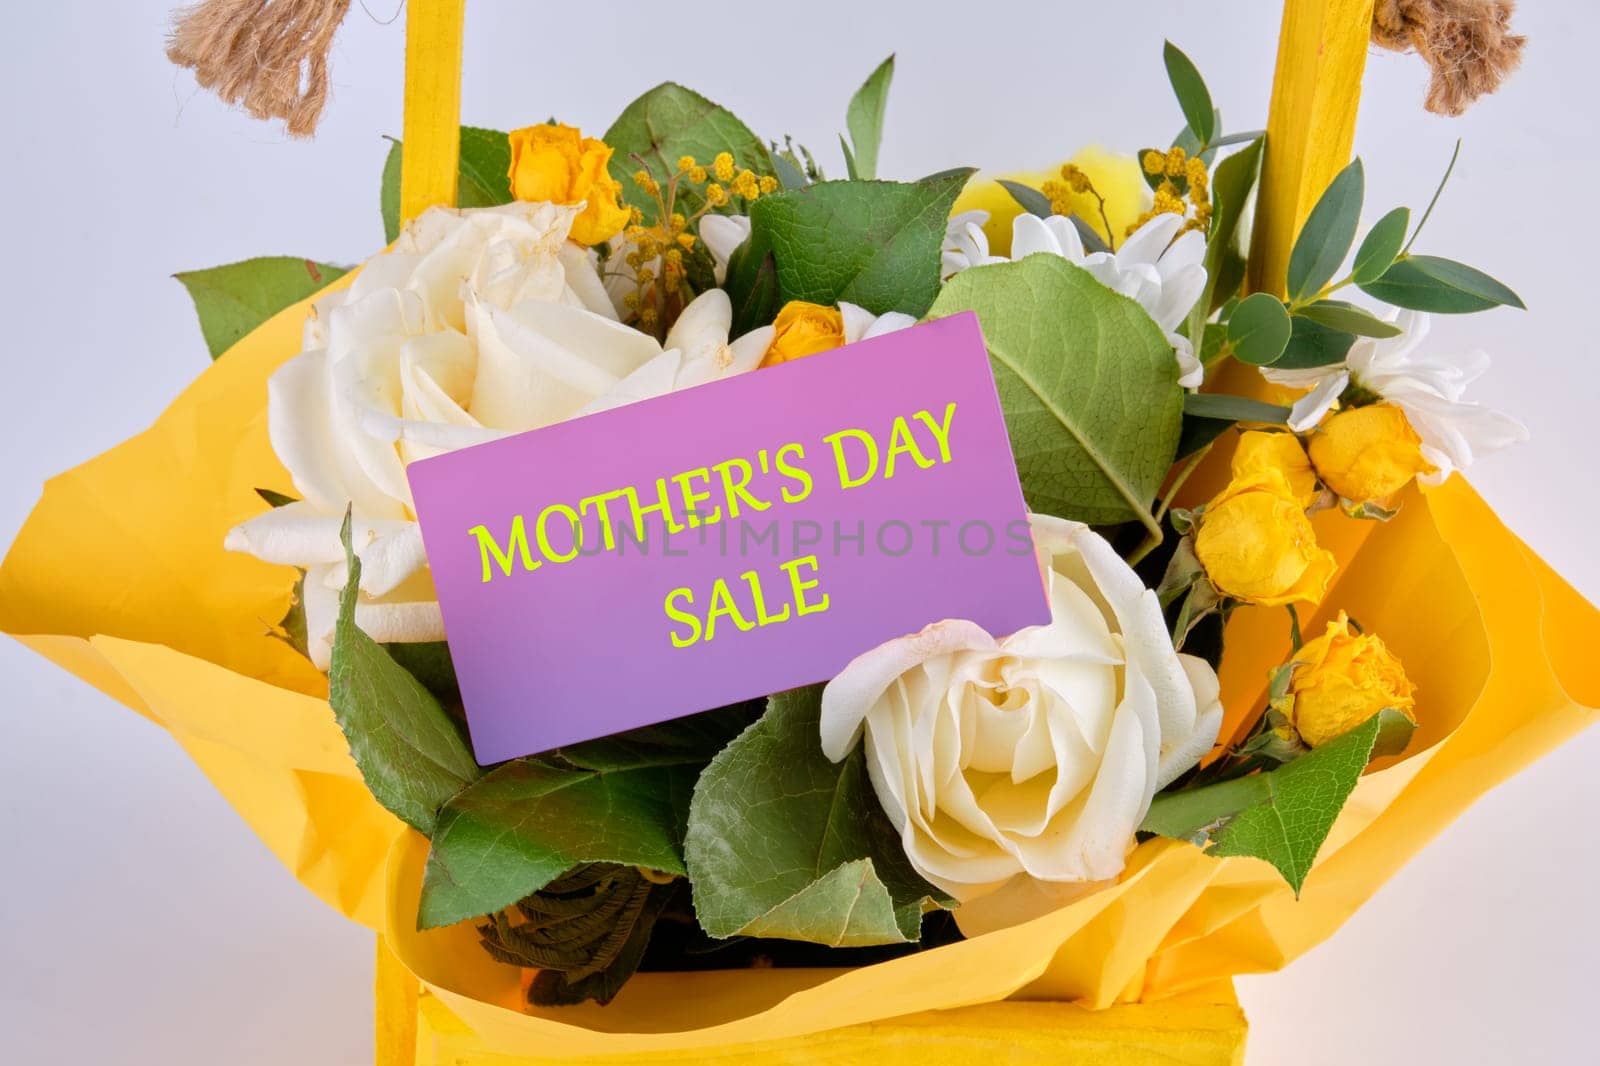 MOTHER'S DAY SALE text on a beautiful purple business card in bright green letters